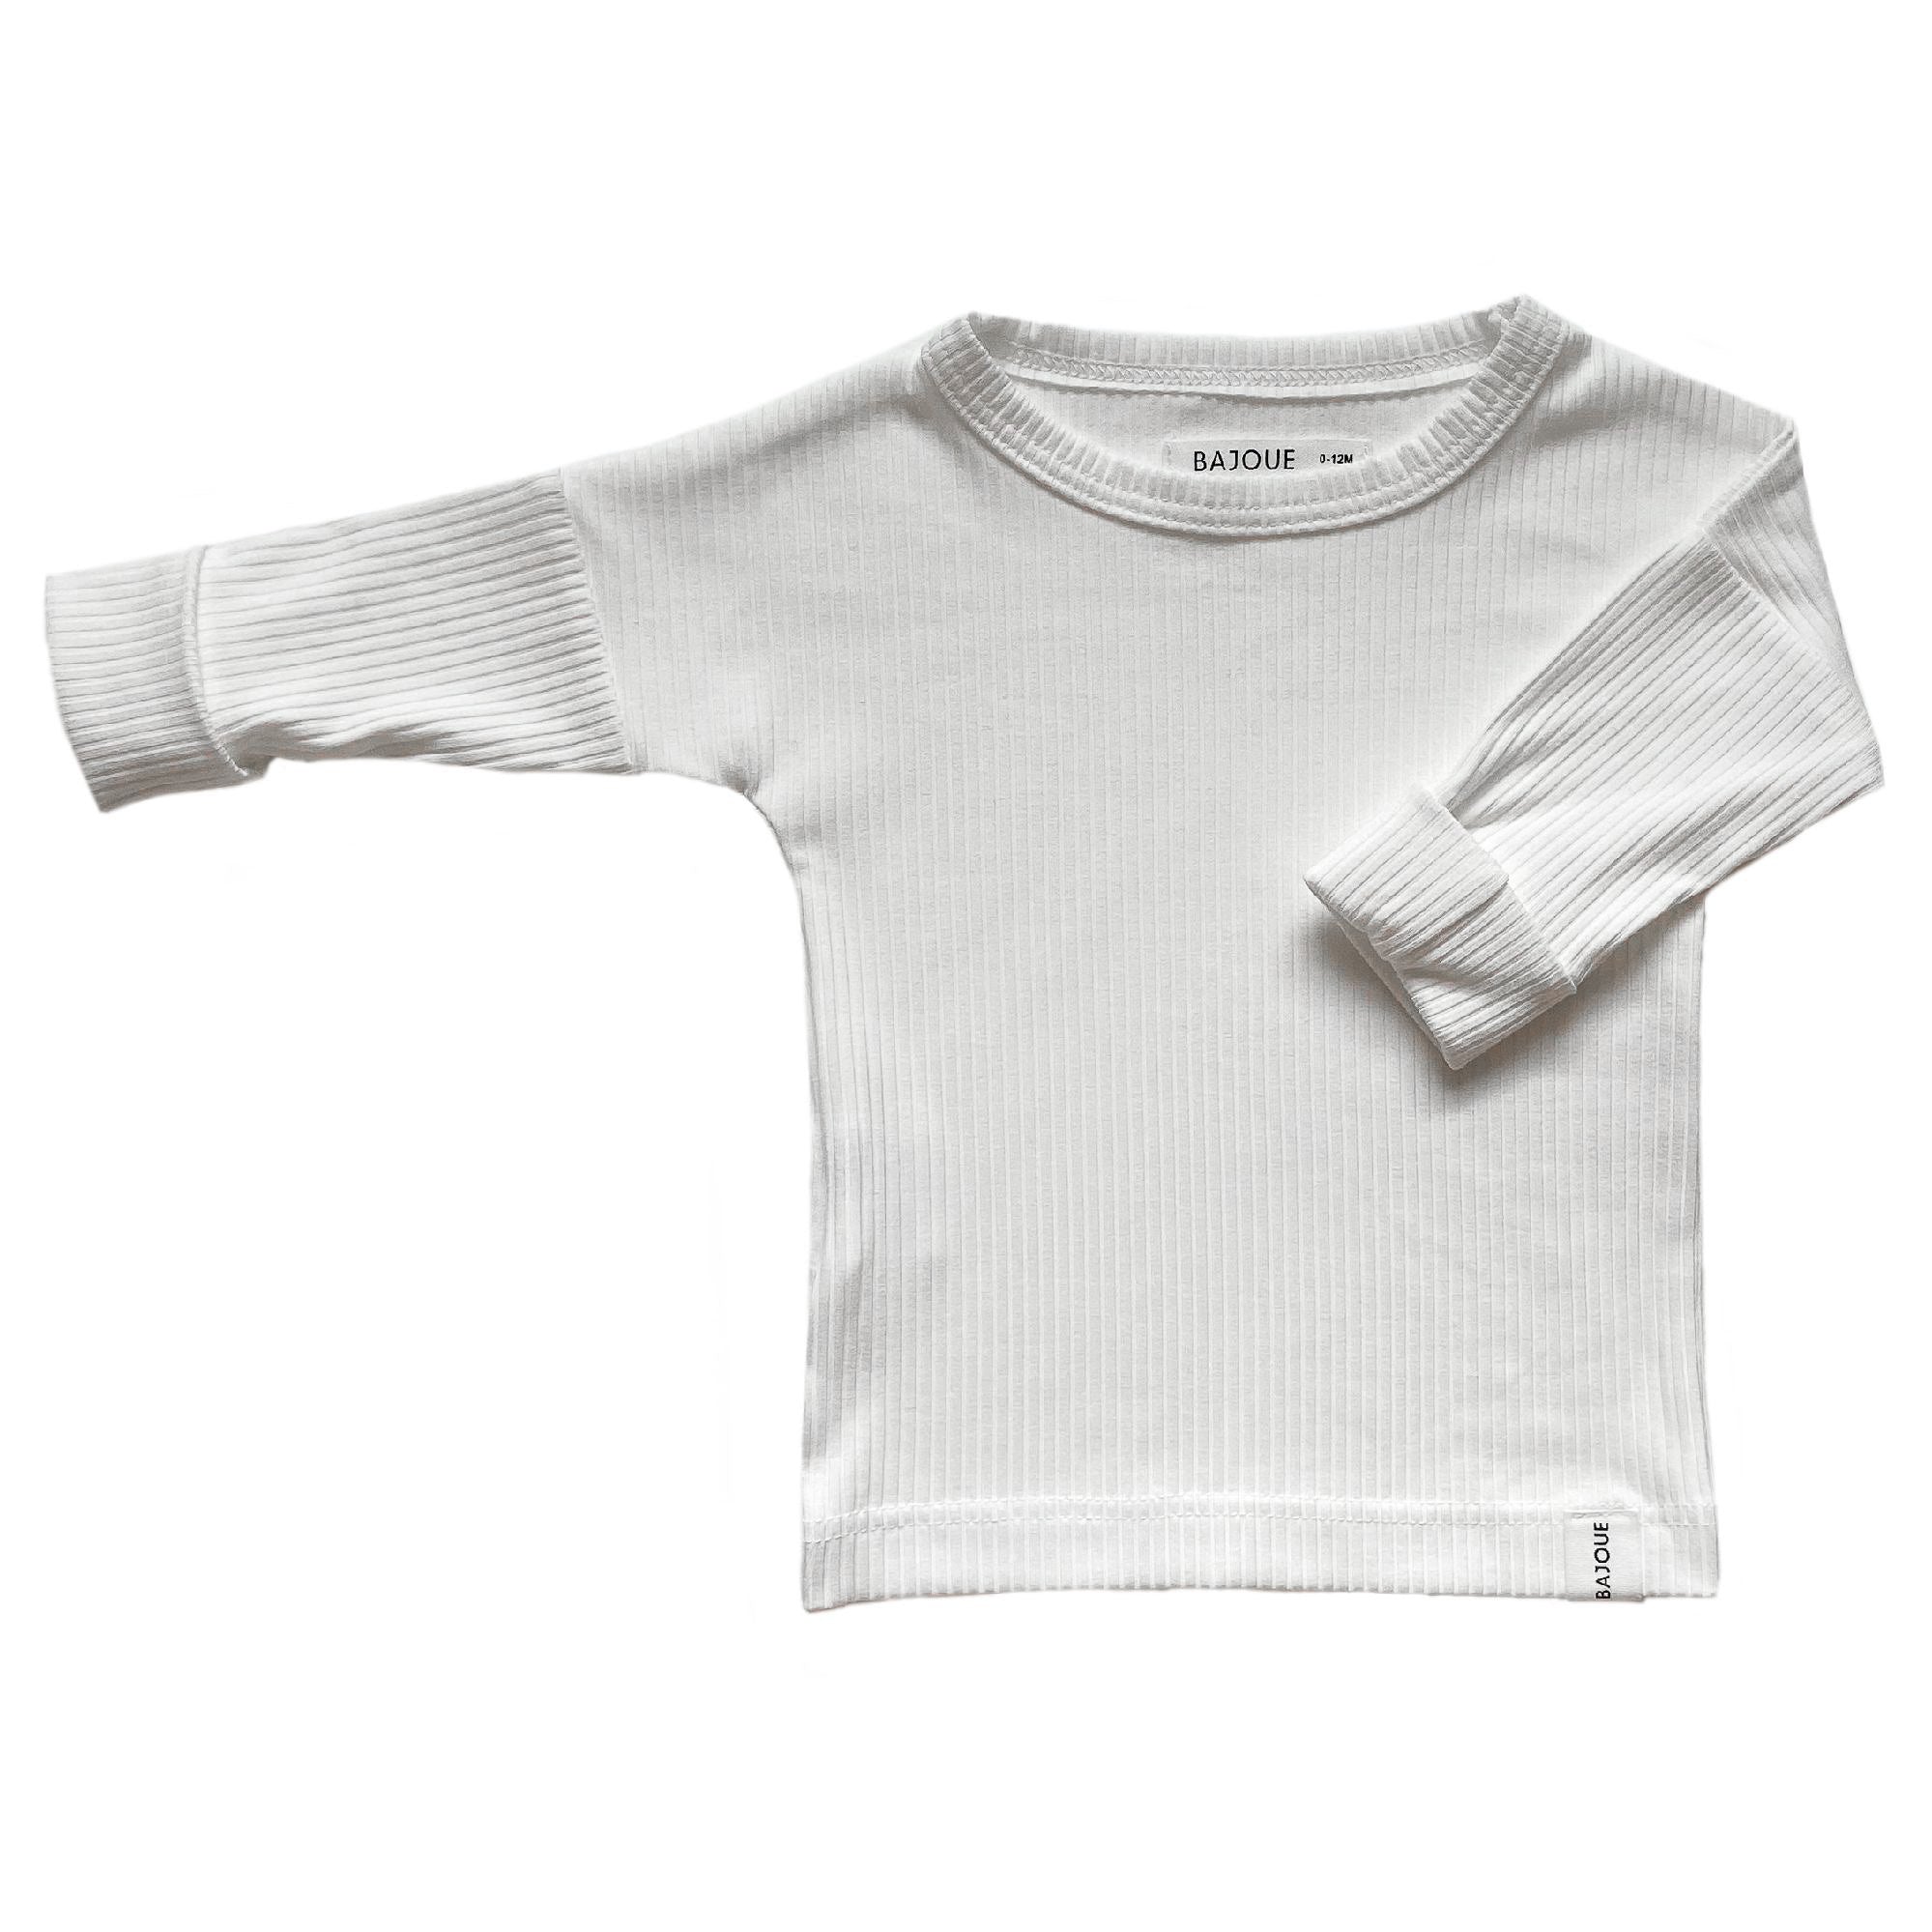 Bamboo Sweater for babies and children - Cream